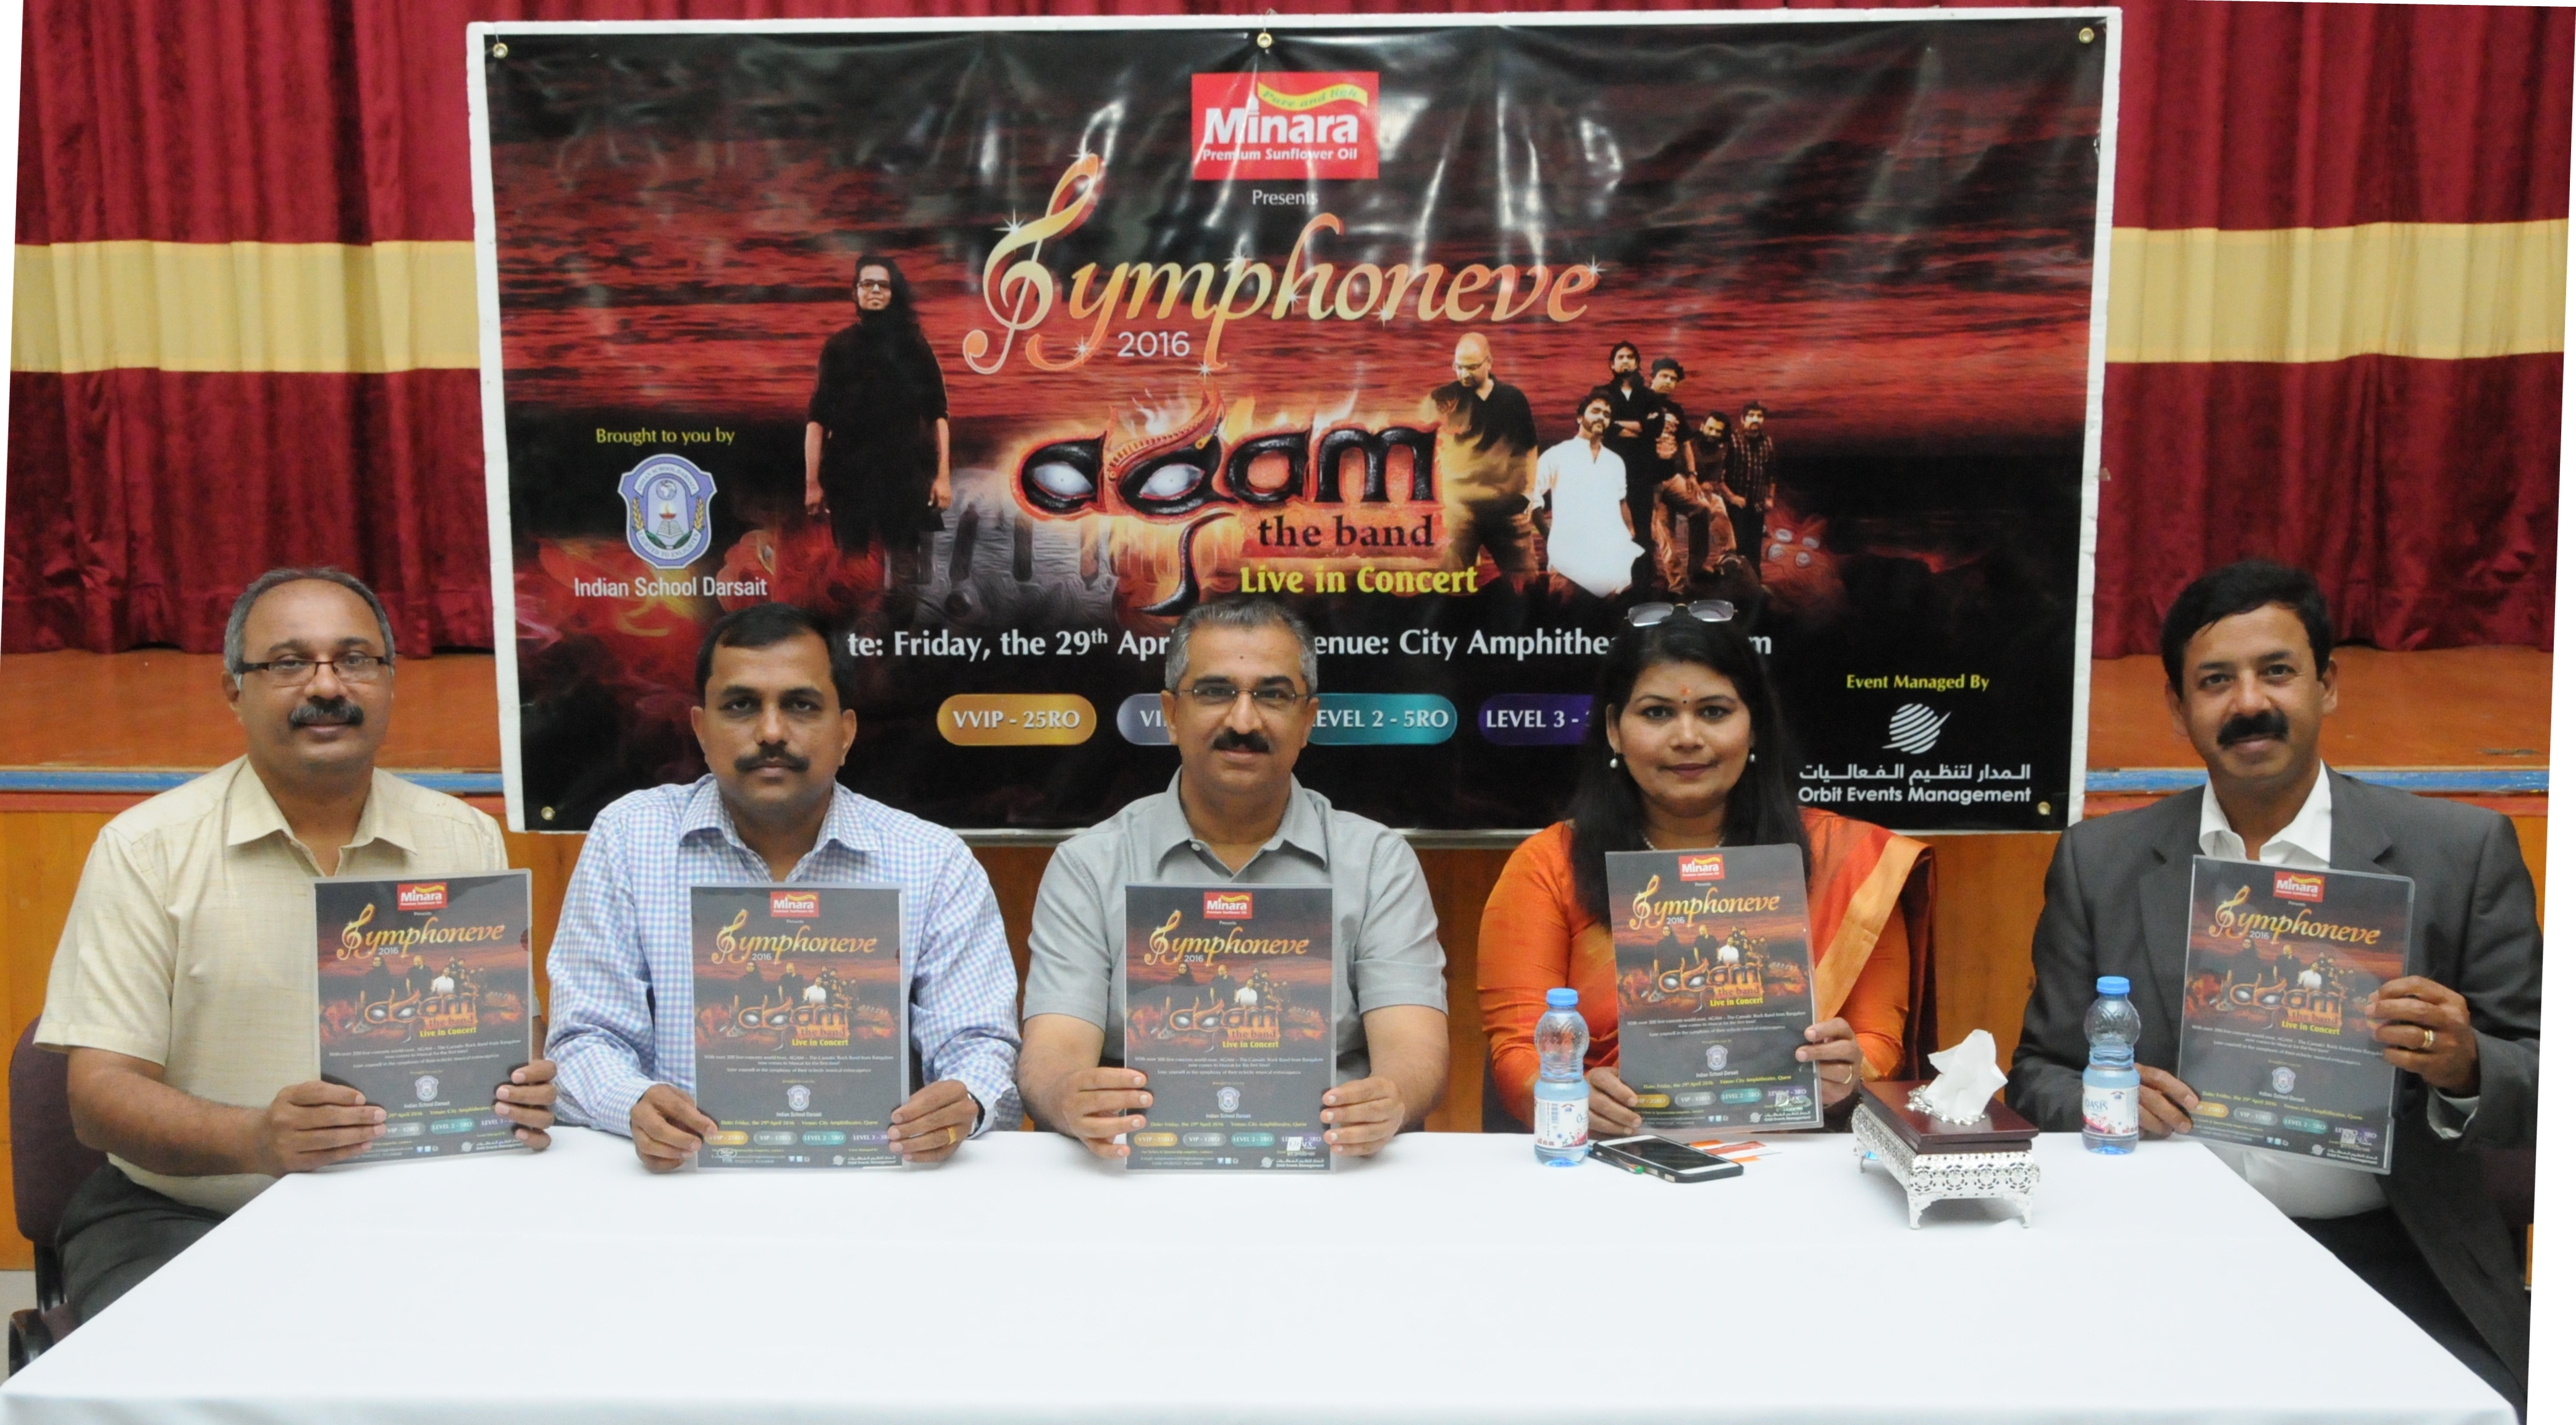 Indian School Darsait all set to host Agam band